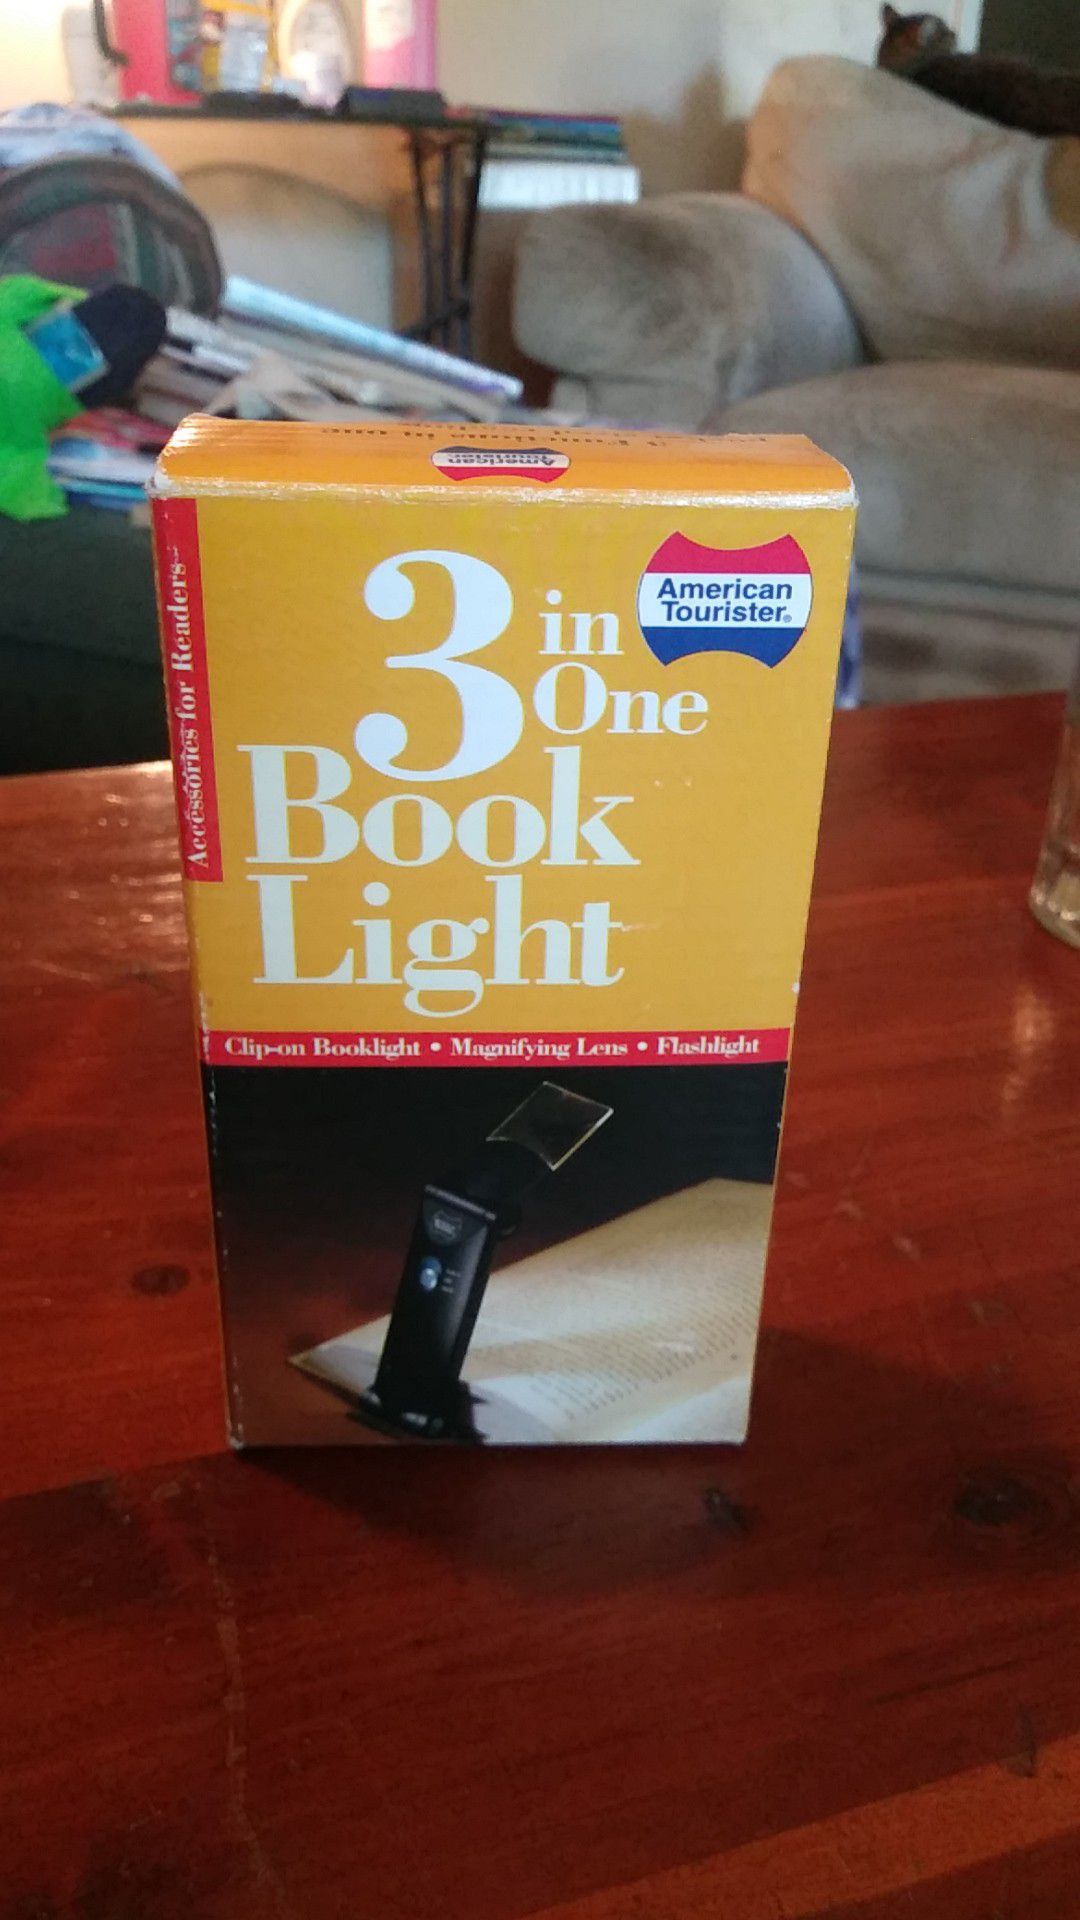 American Tourister 3 in One Book Light